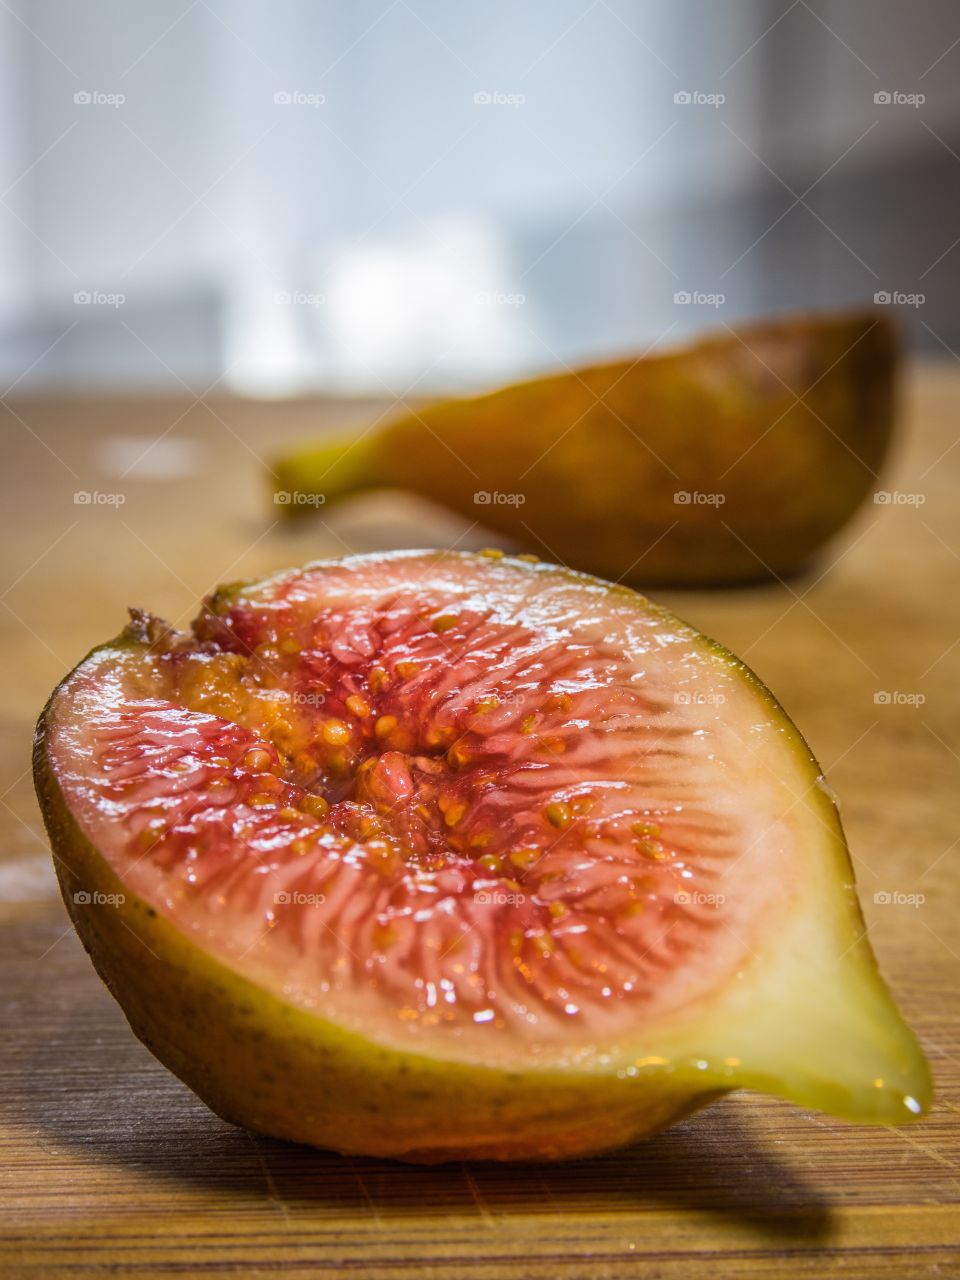 Vertical close up of the inside of half a fig on a wooden cutting board on a kitchen counter with the other half in soft focus in the background